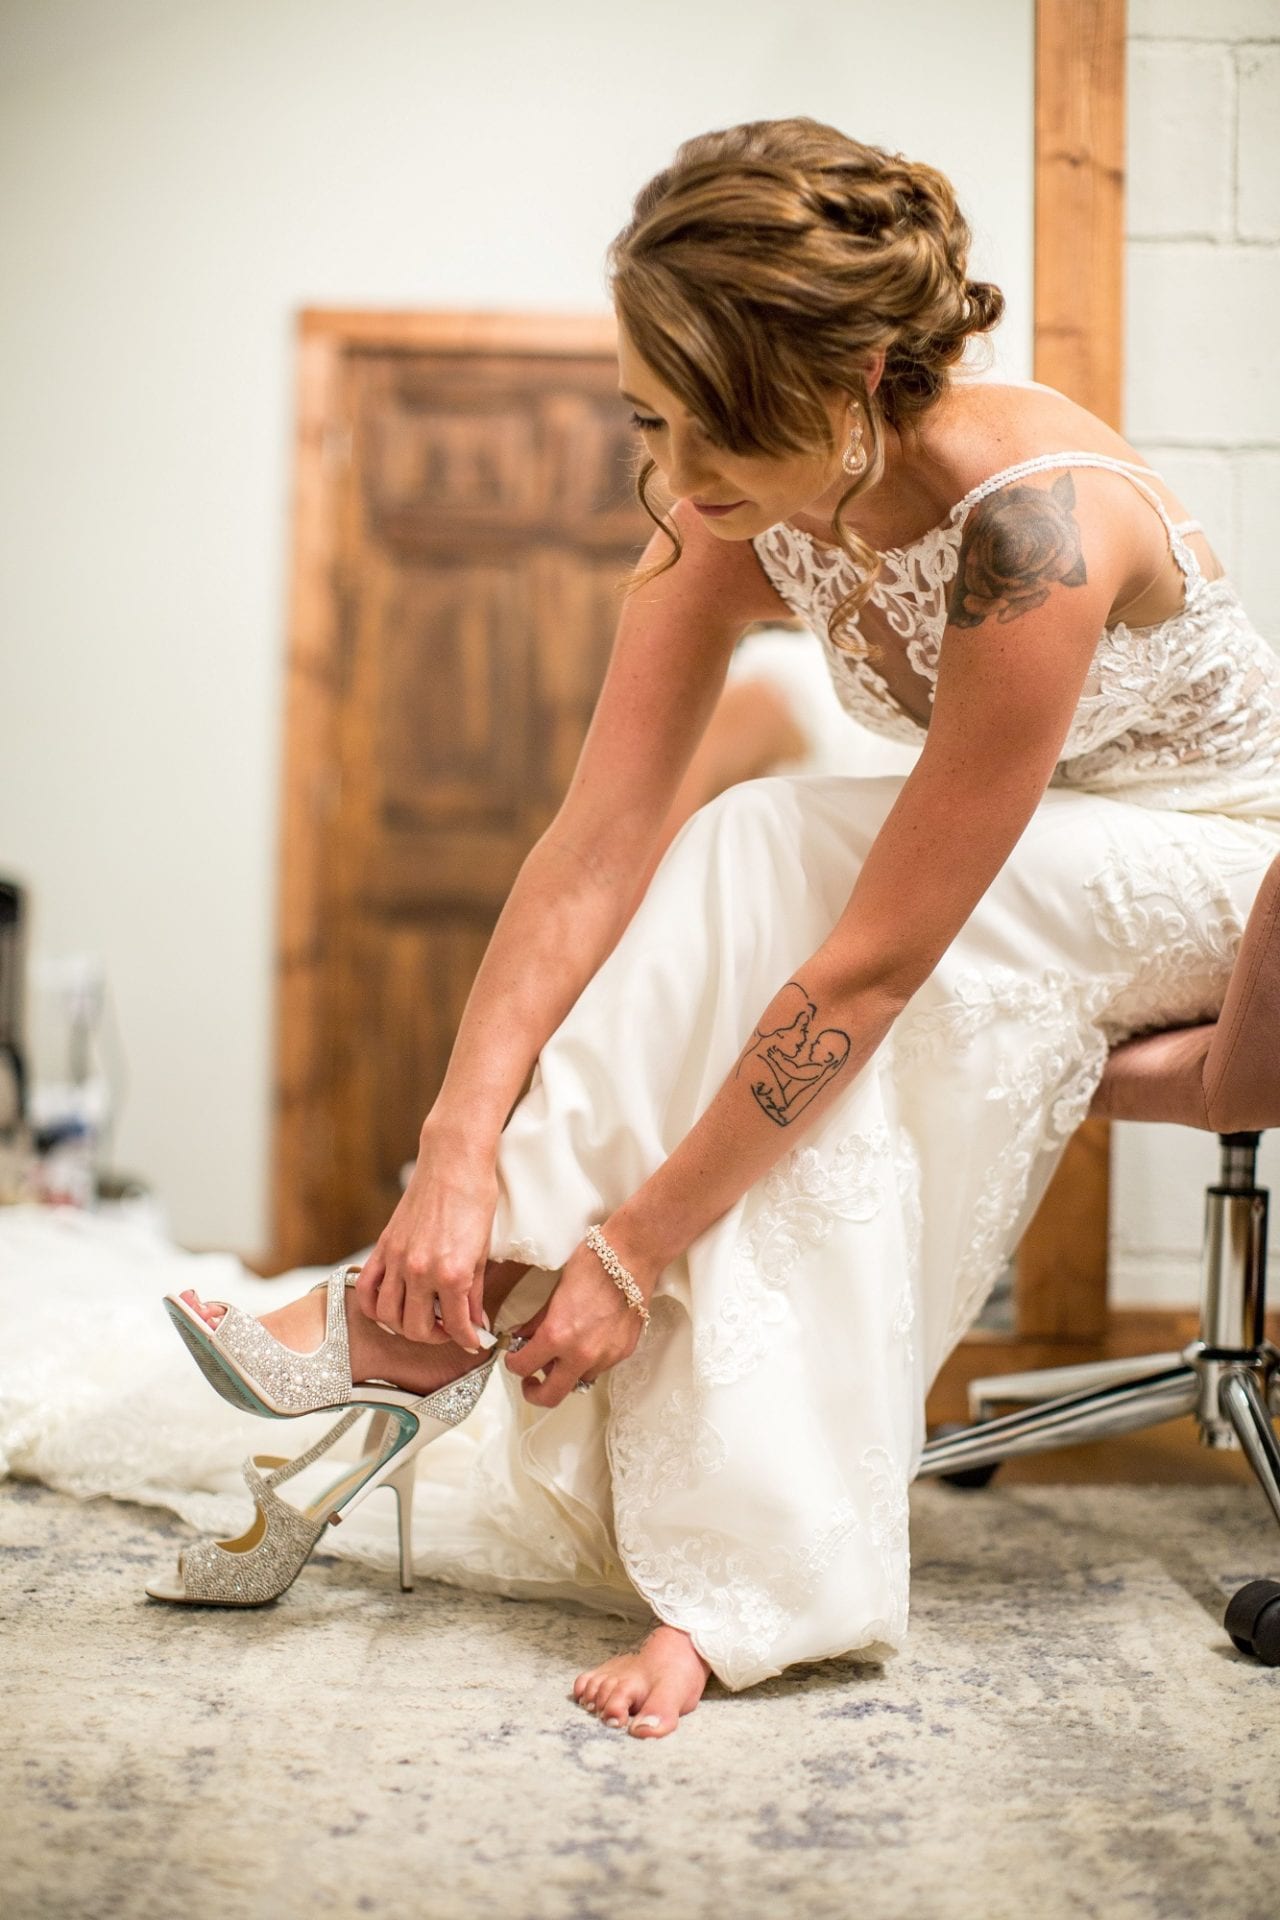 Event and Wedding Photographers in Fargo, ND